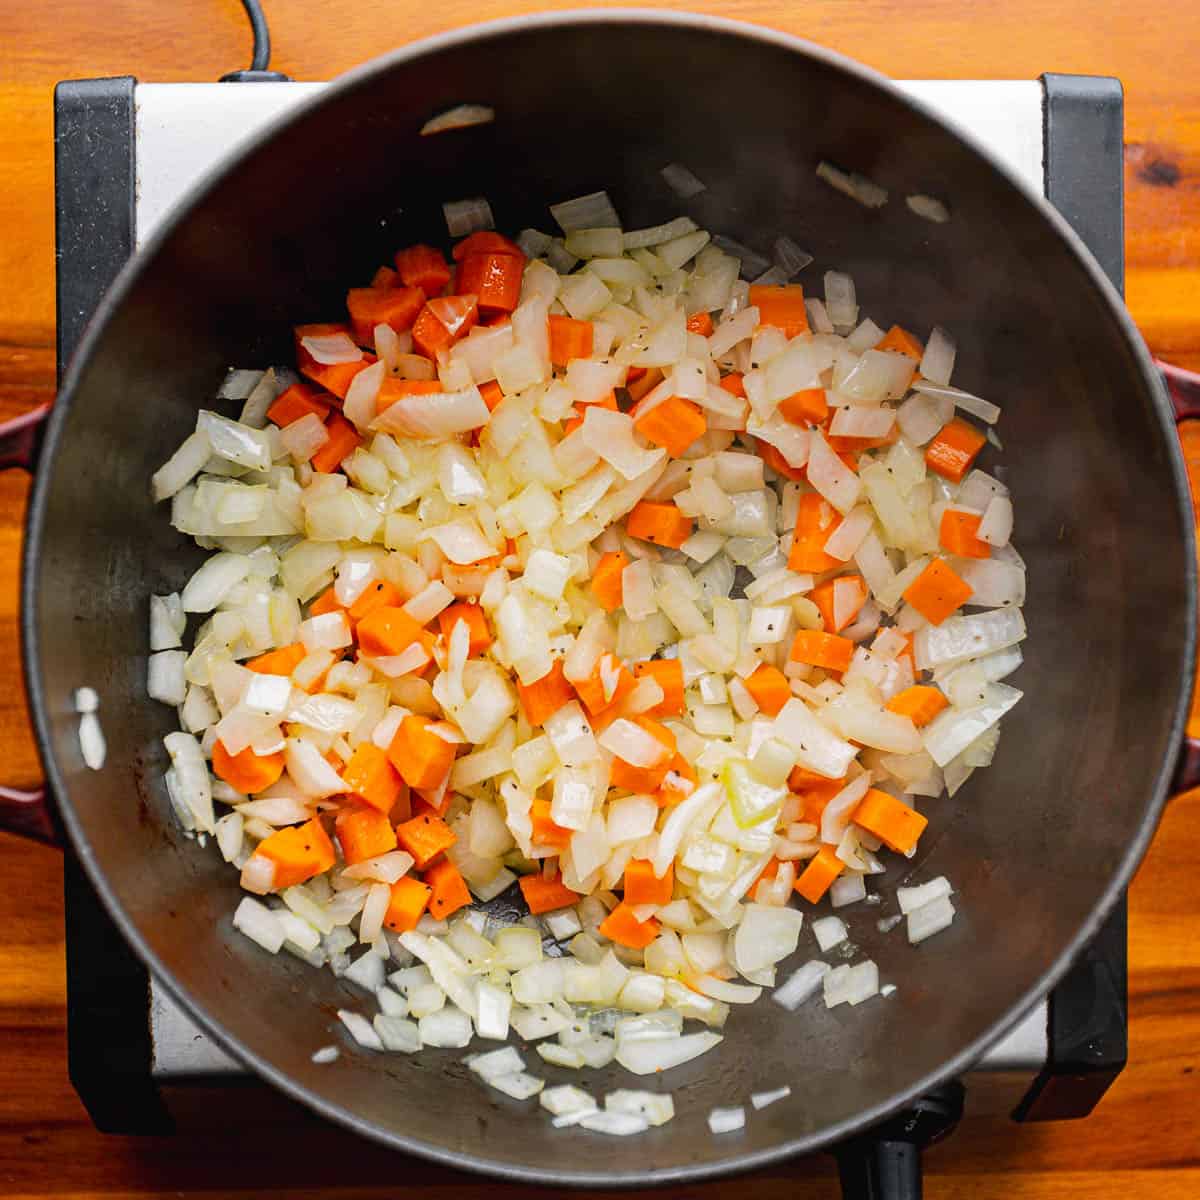 Add the diced onion and carrots, sauté for 4 minutes or until slightly softened.